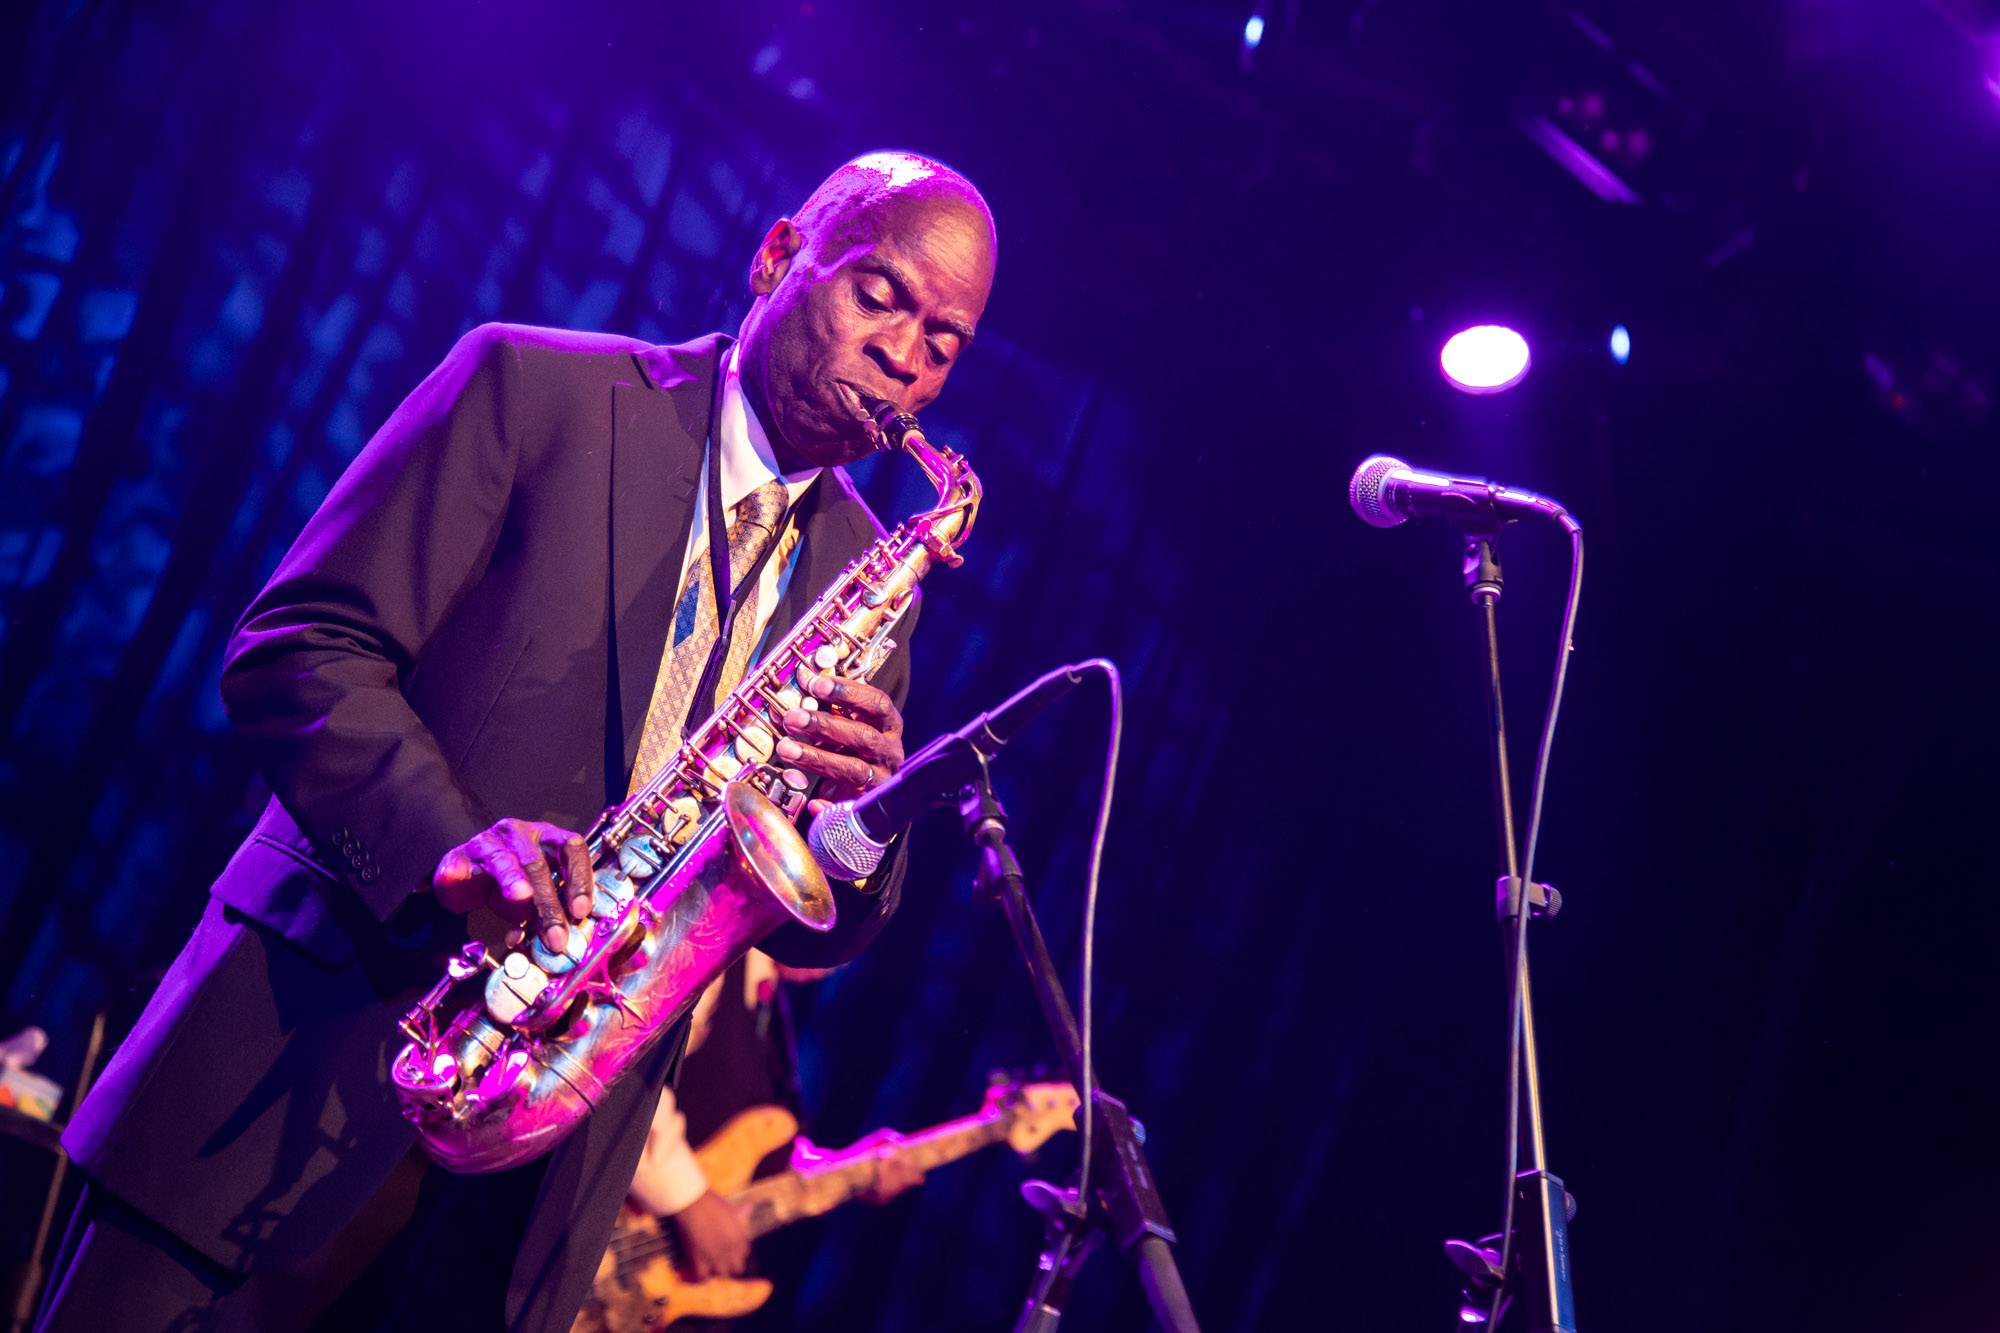 Maceo Parker at the Commodore Ballroom, Vancouver, Aug 21 2018. Kirk Chantraine photo.